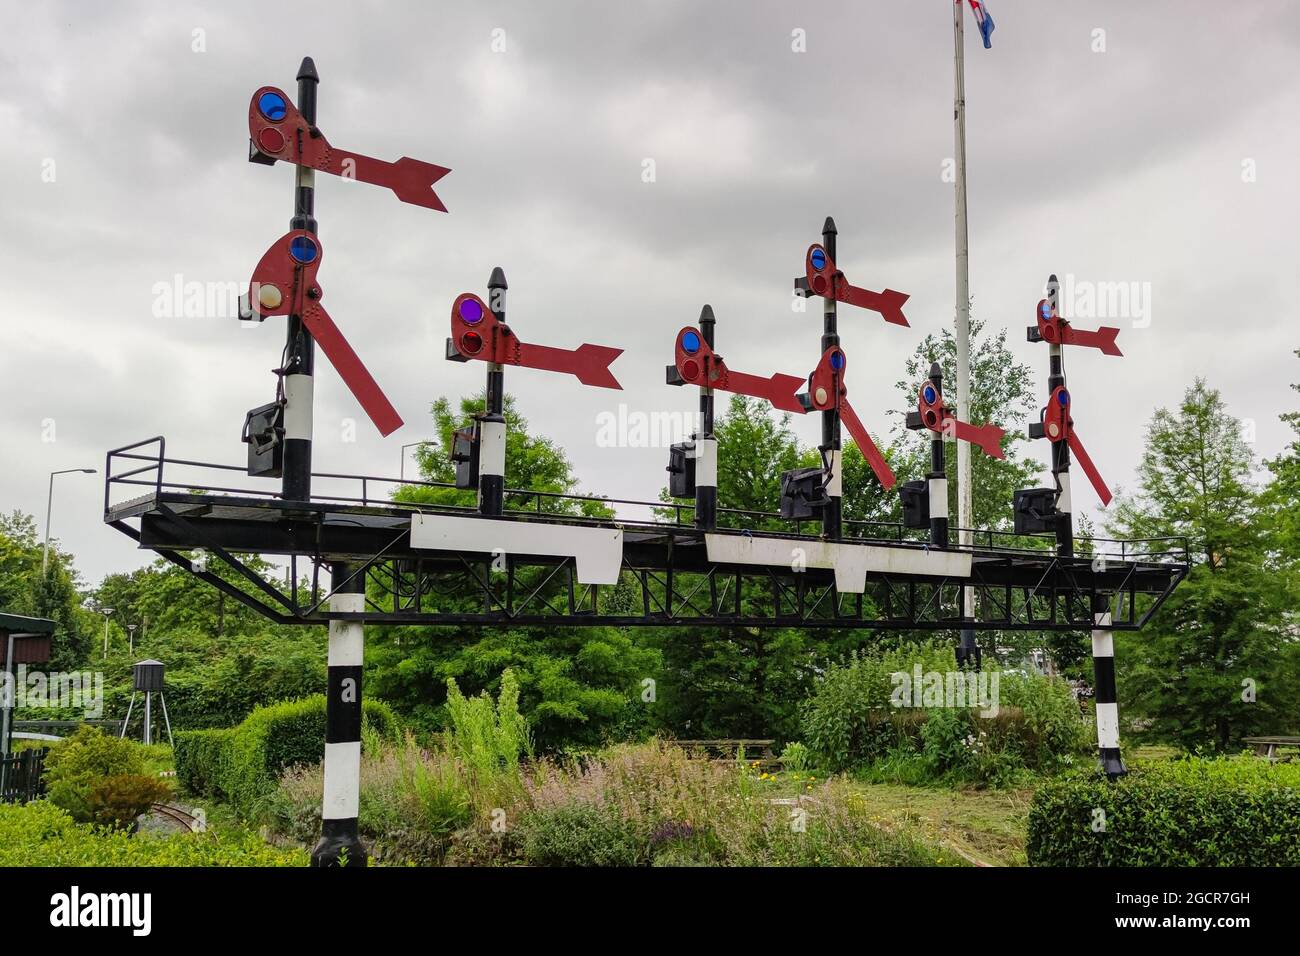 Old signal posts in a railway park in The Hague, Netherlands Stock Photo